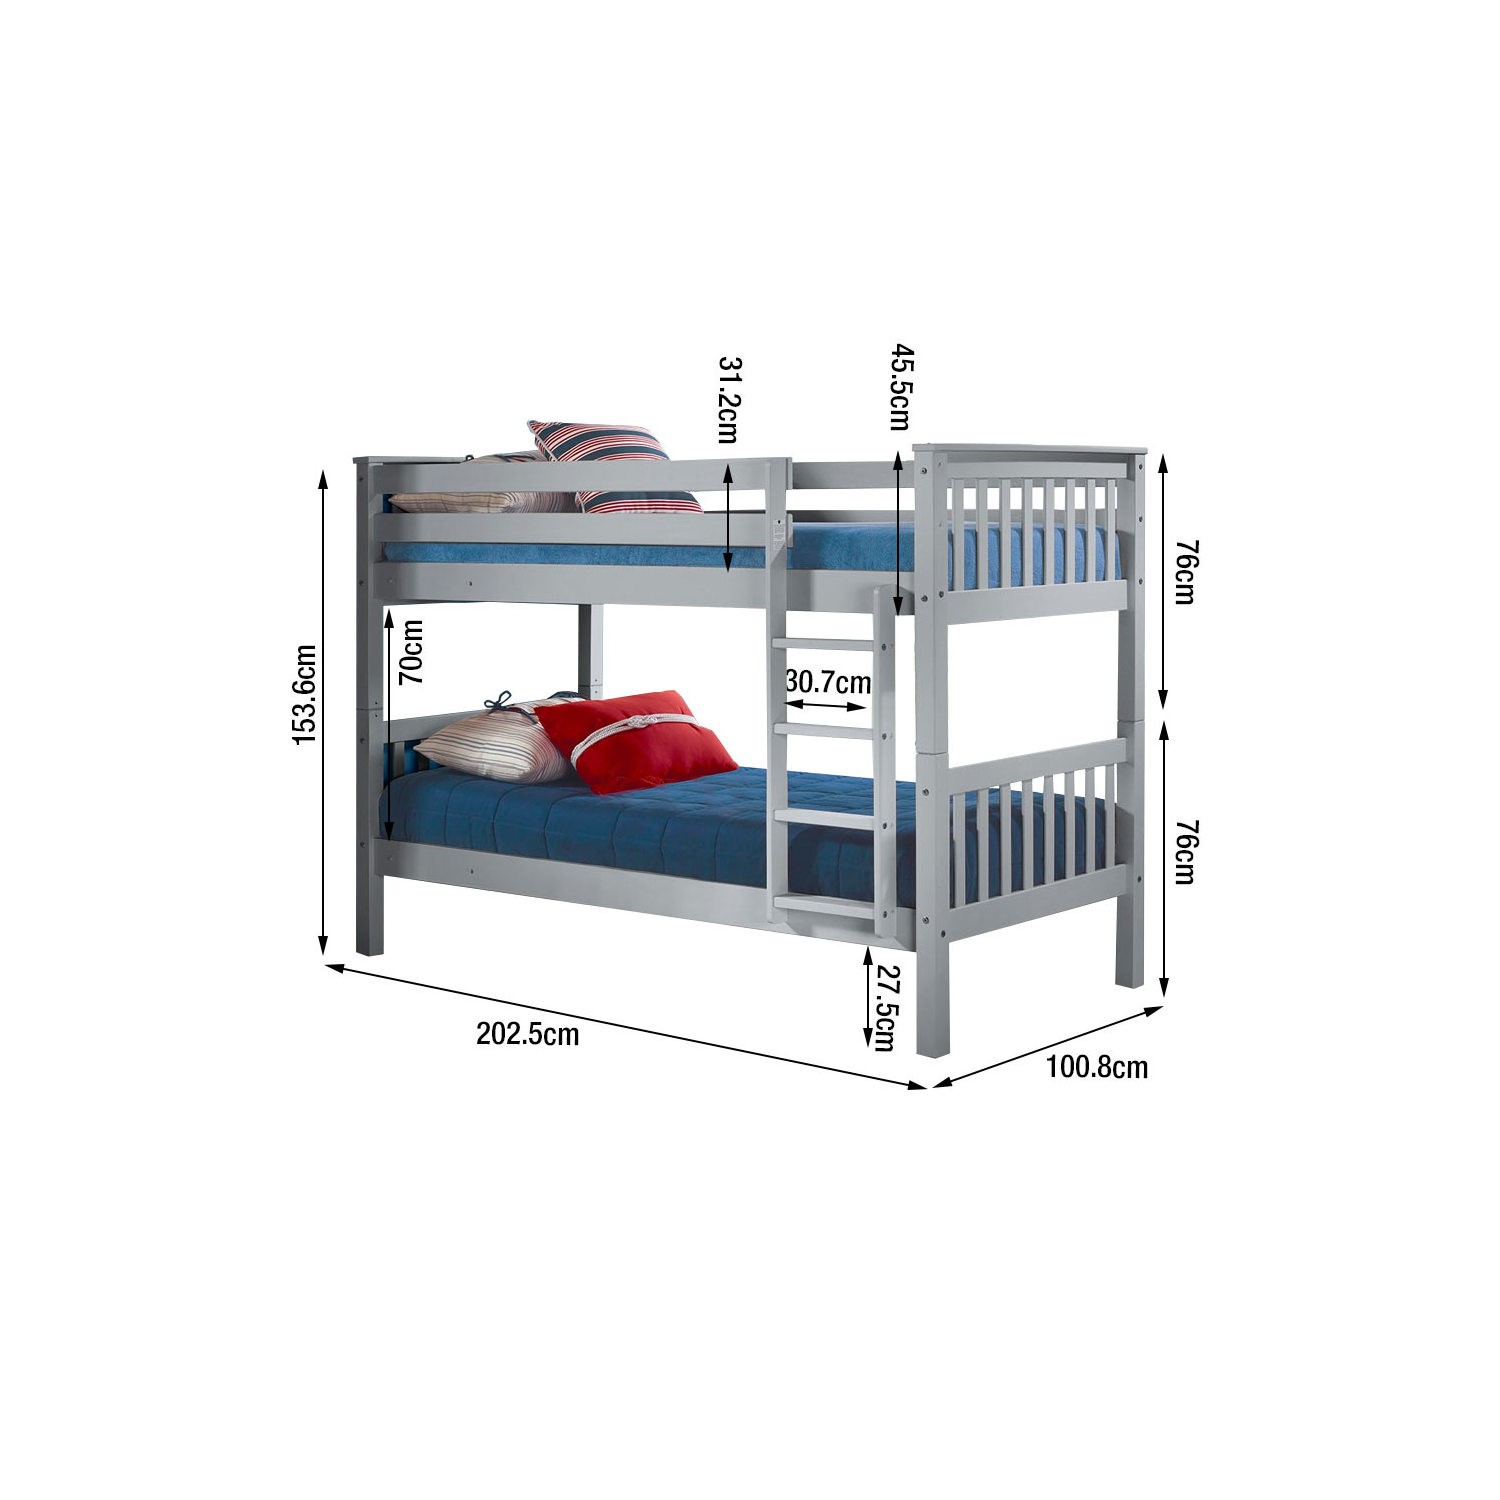 Oxford Single Bunk Bed In Light Grey, Single Bunk Bed Dimensions